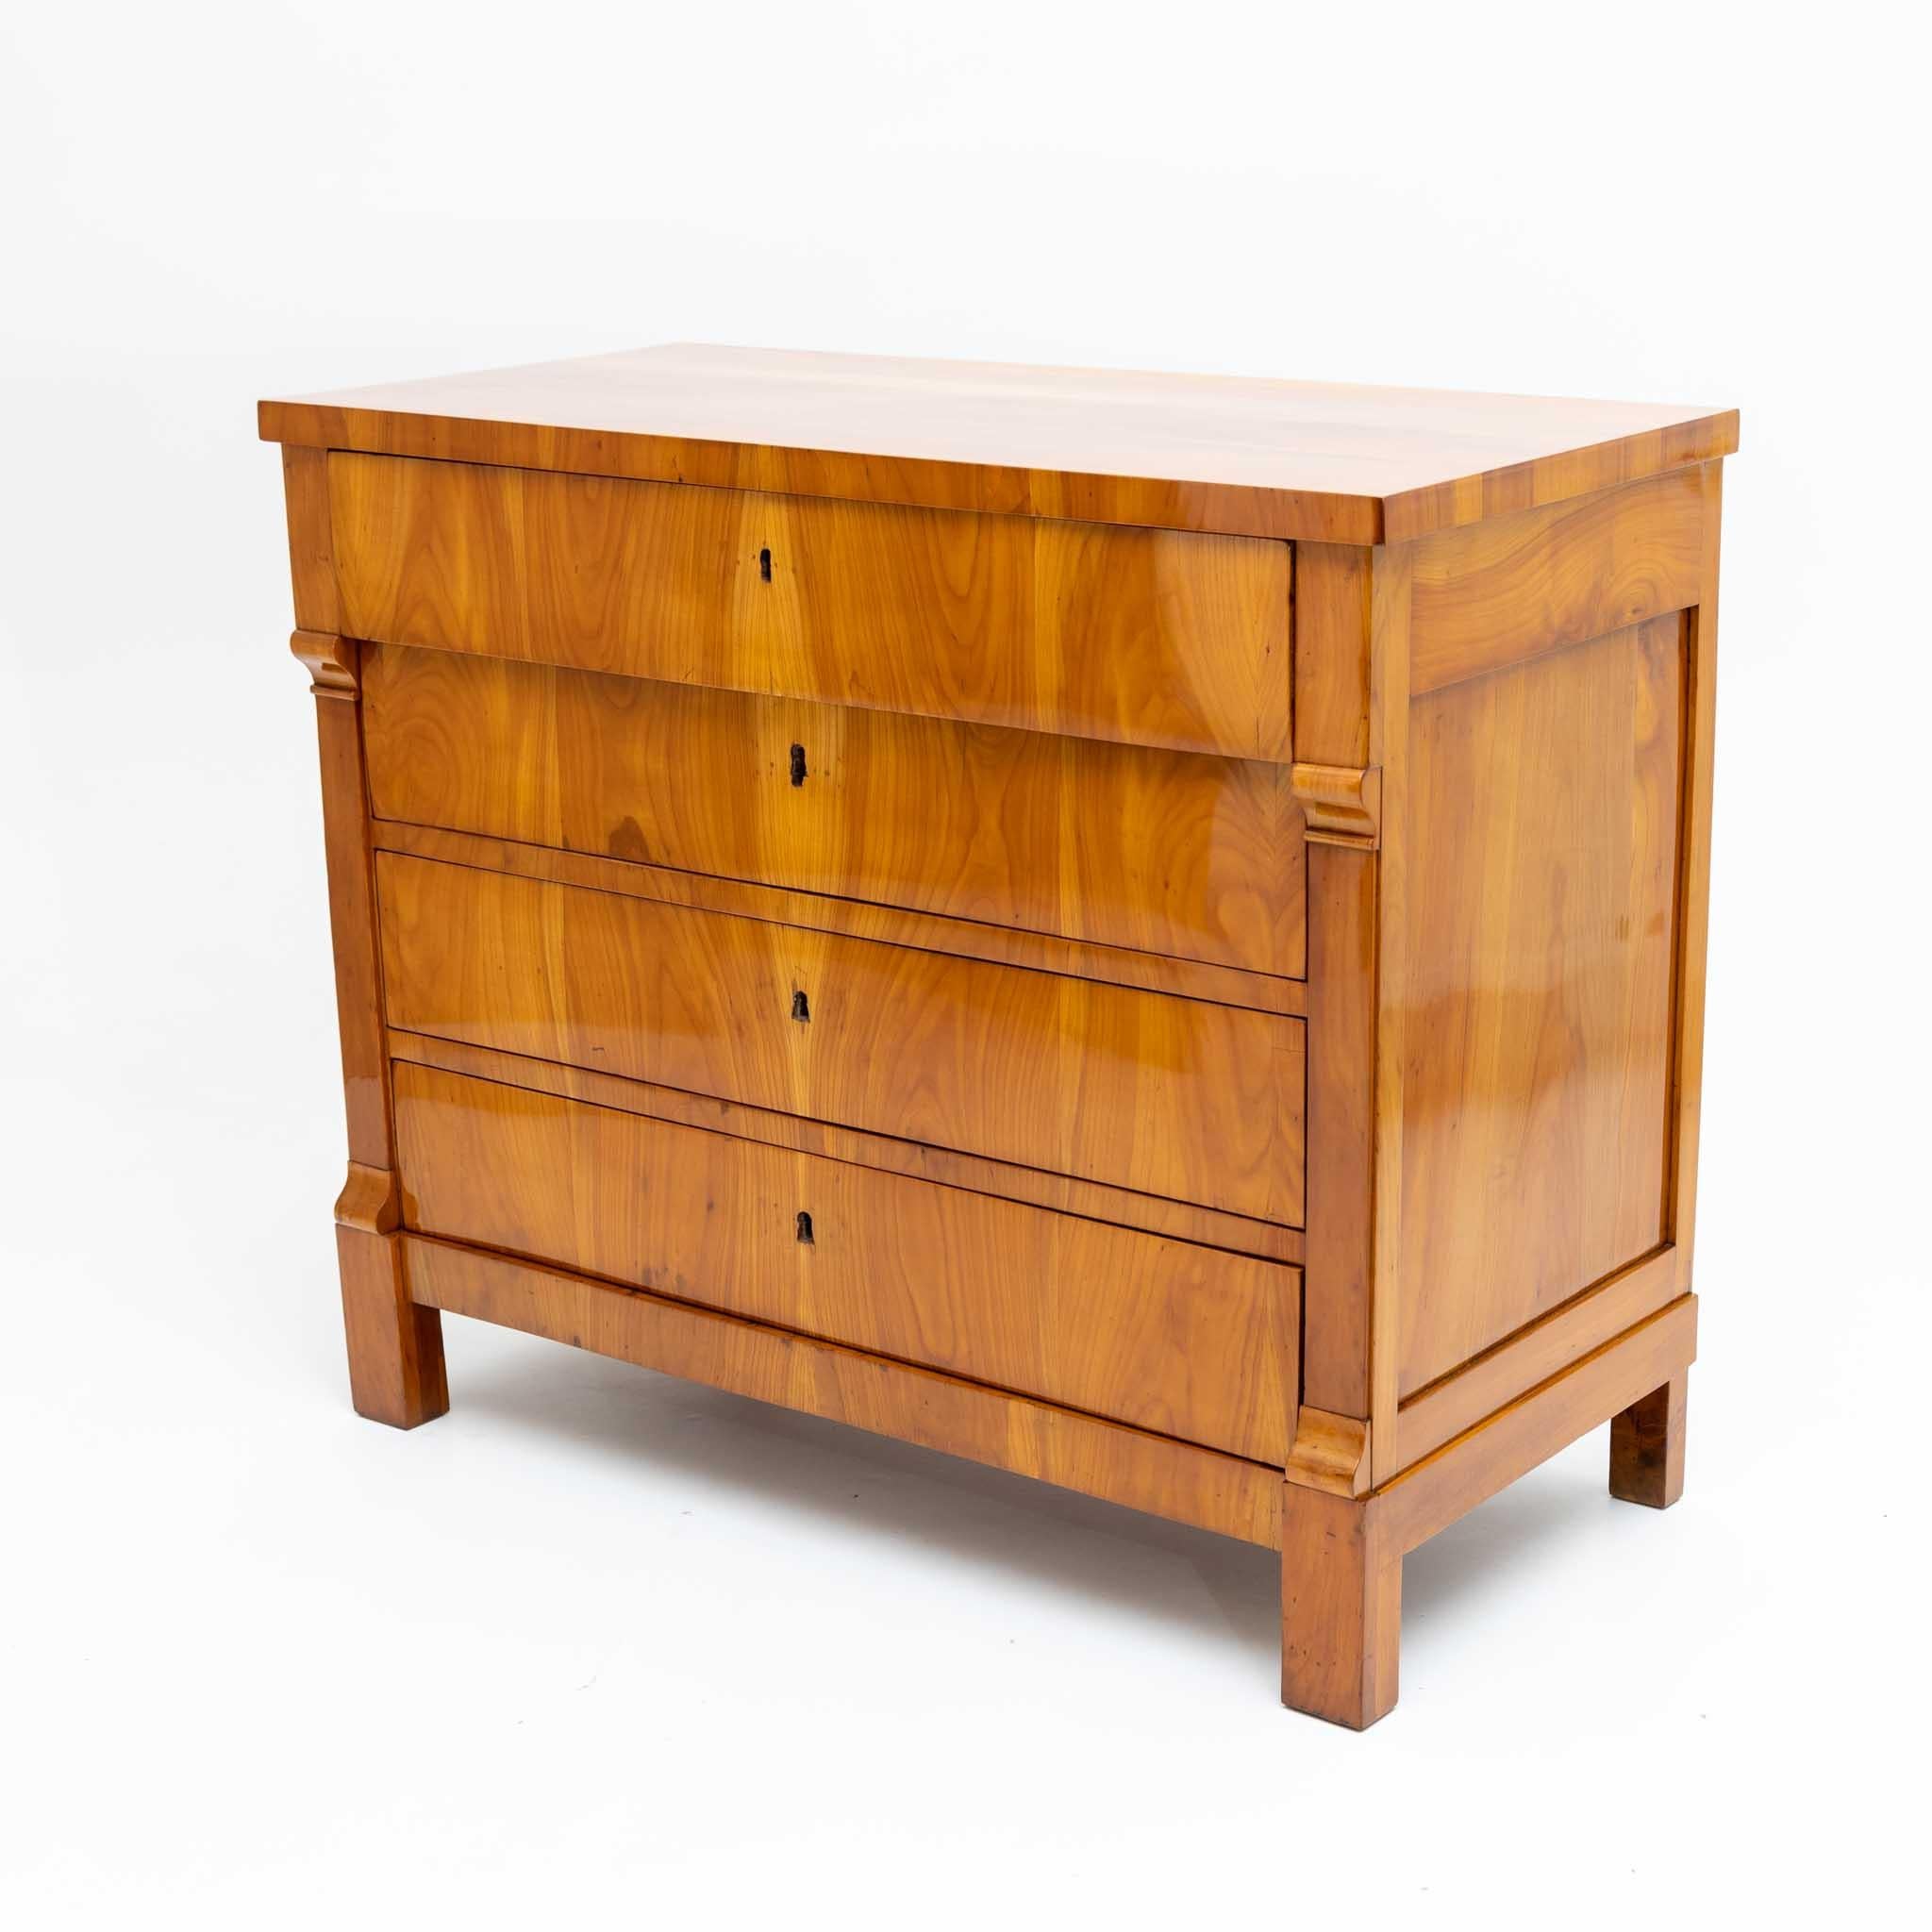 Mid-19th Century Biedermeier Cherrywood Chest of Drawers, four Drawers, Germany, circa 1830